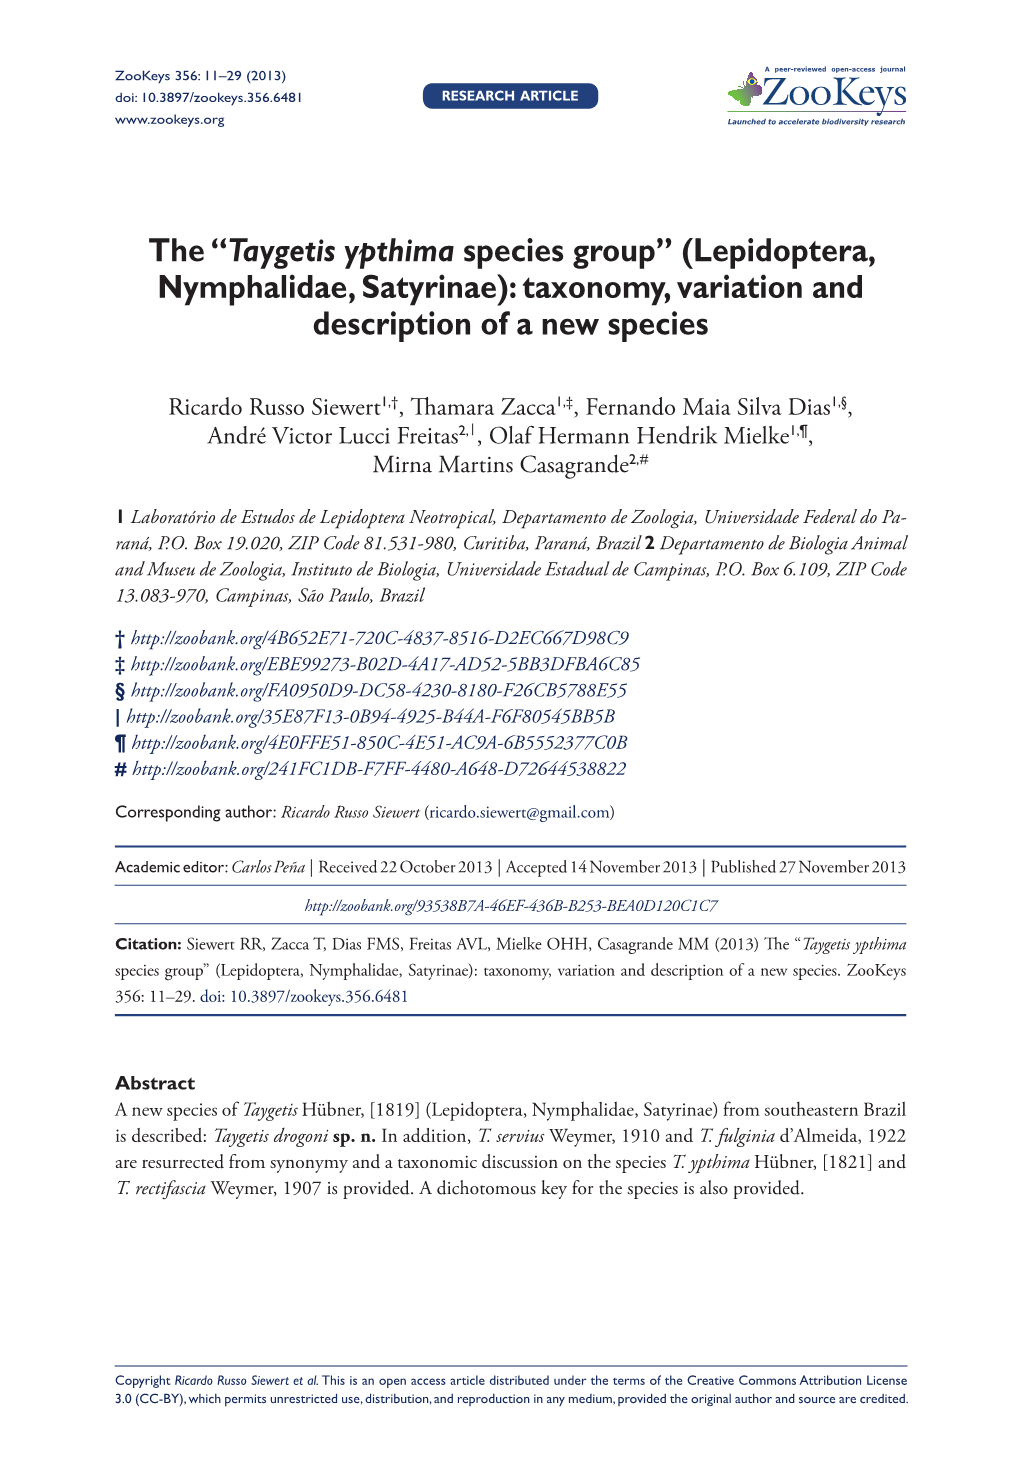 The “Taygetis Ypthima Species Group” (Lepidoptera, Nymphalidae, Satyrinae): Taxonomy, Variation and Description of a New Species